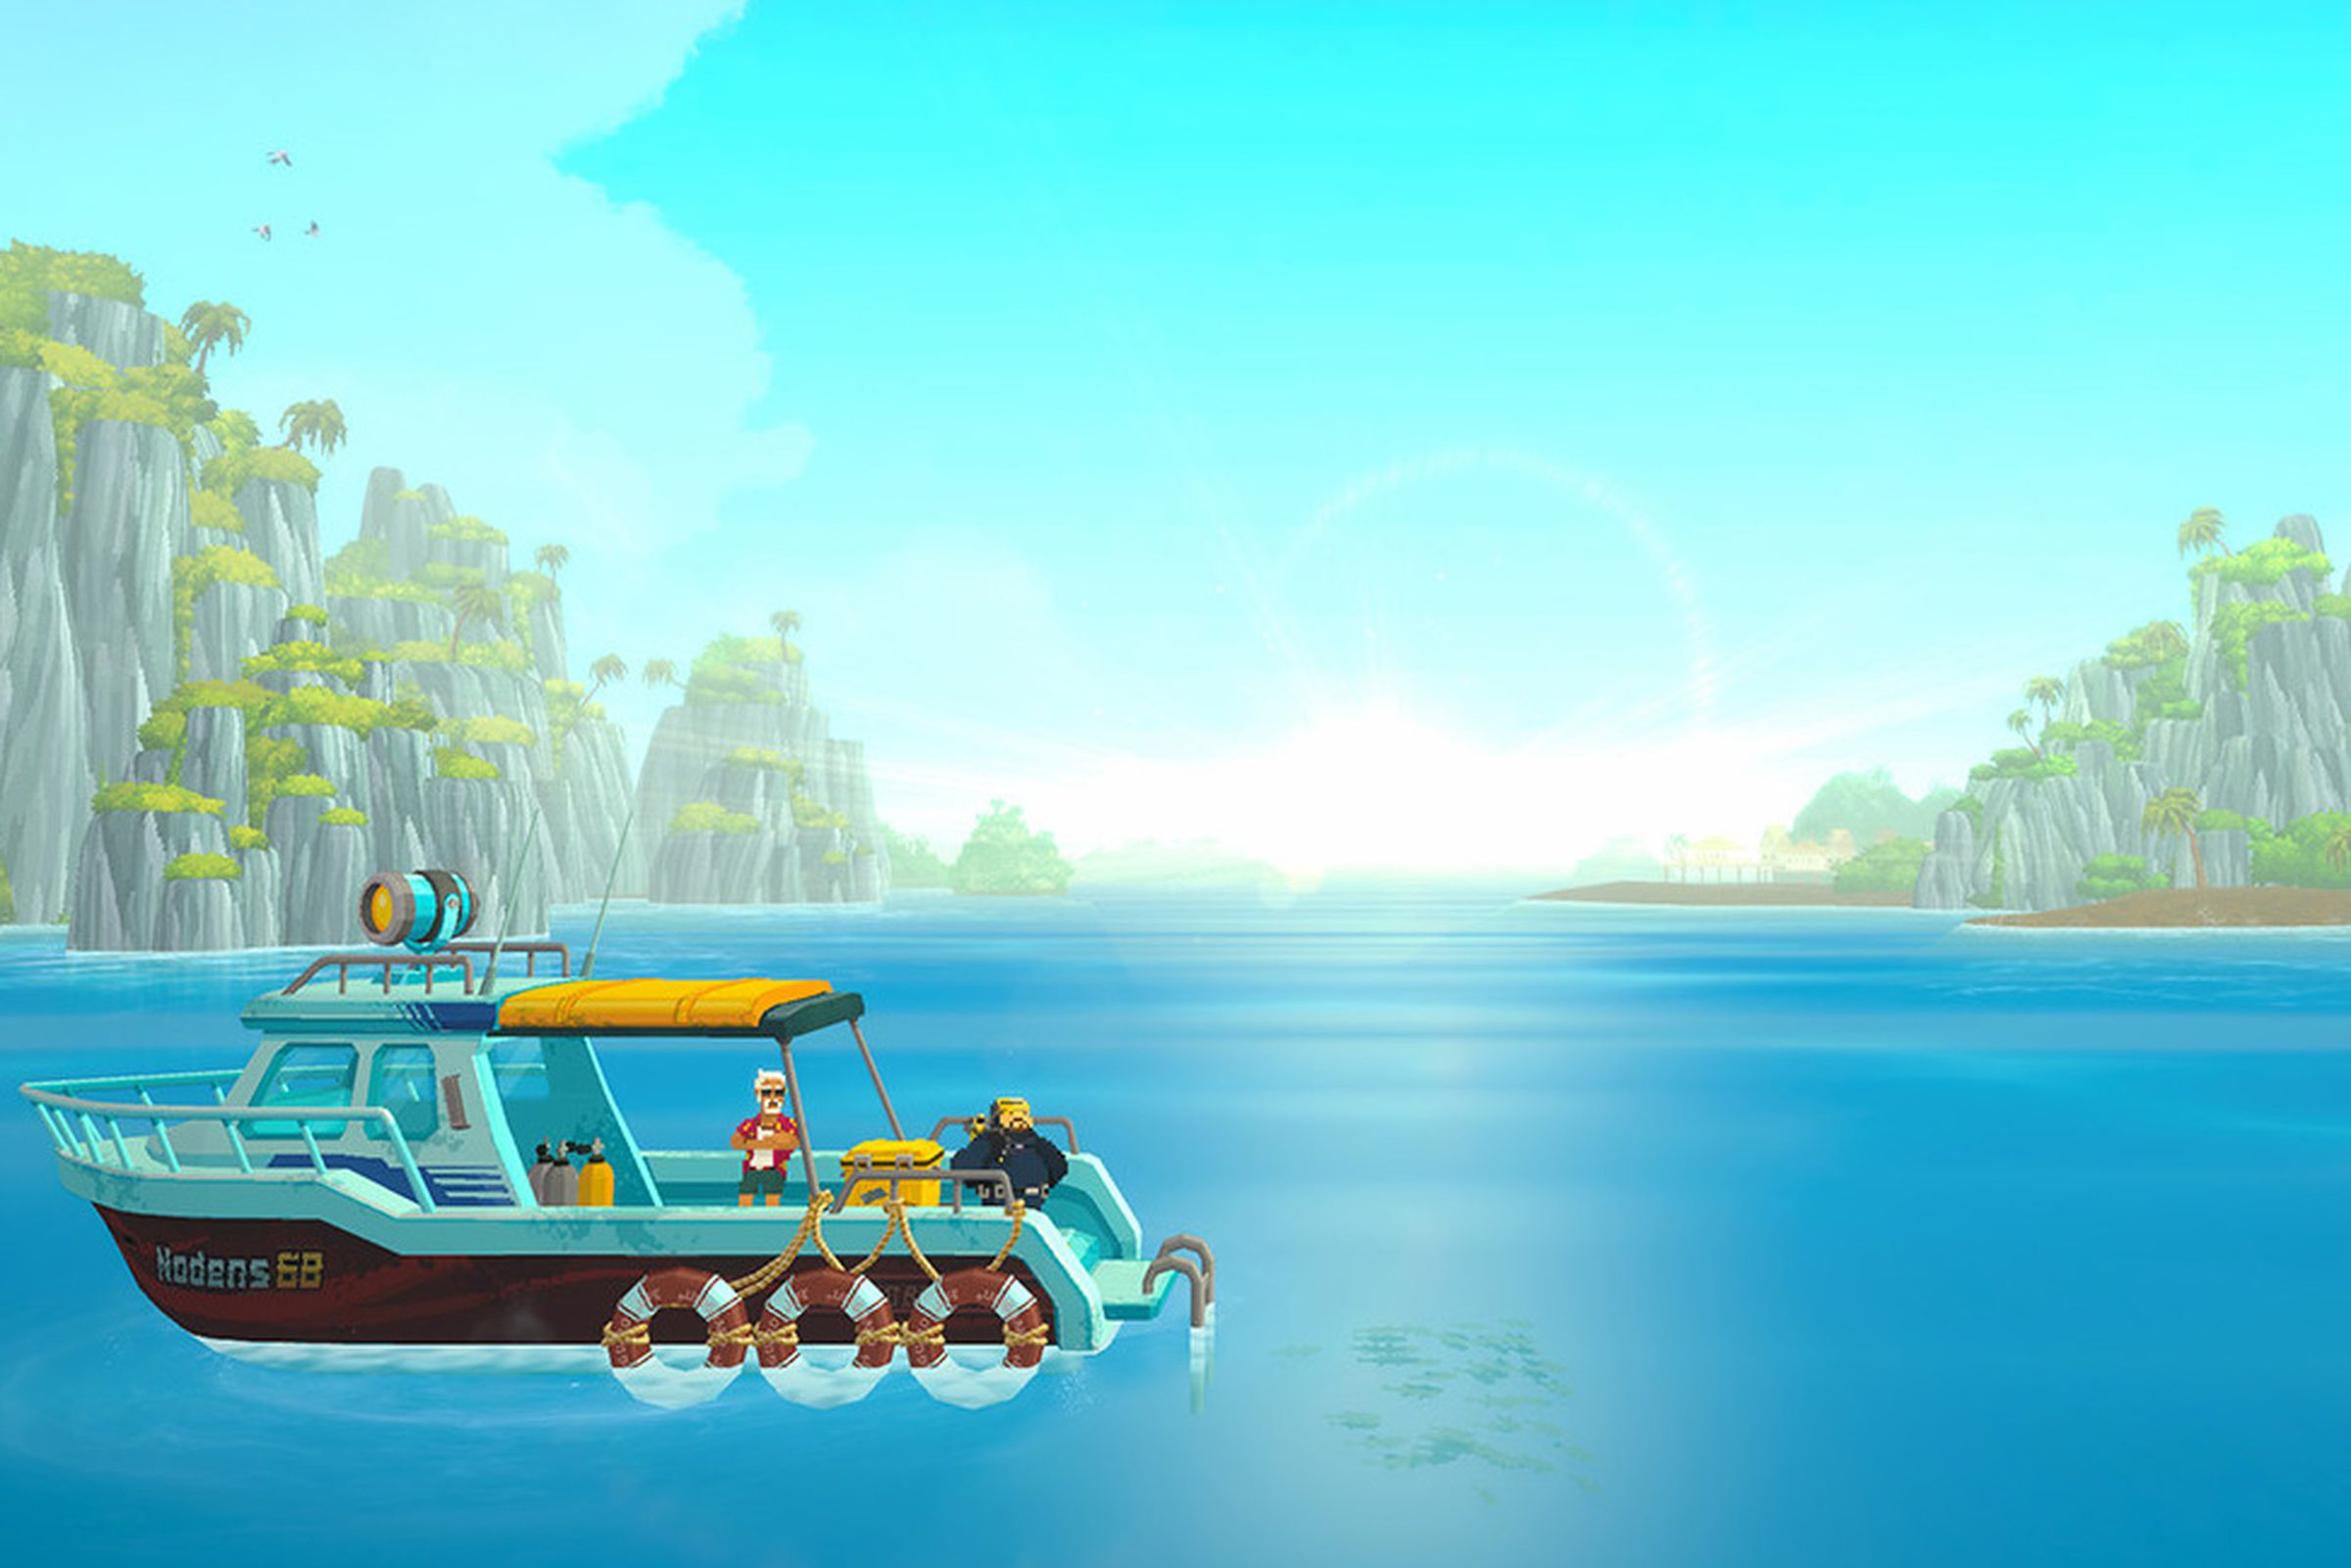 A screenshot from Dave the Diver showing a boat on the water.